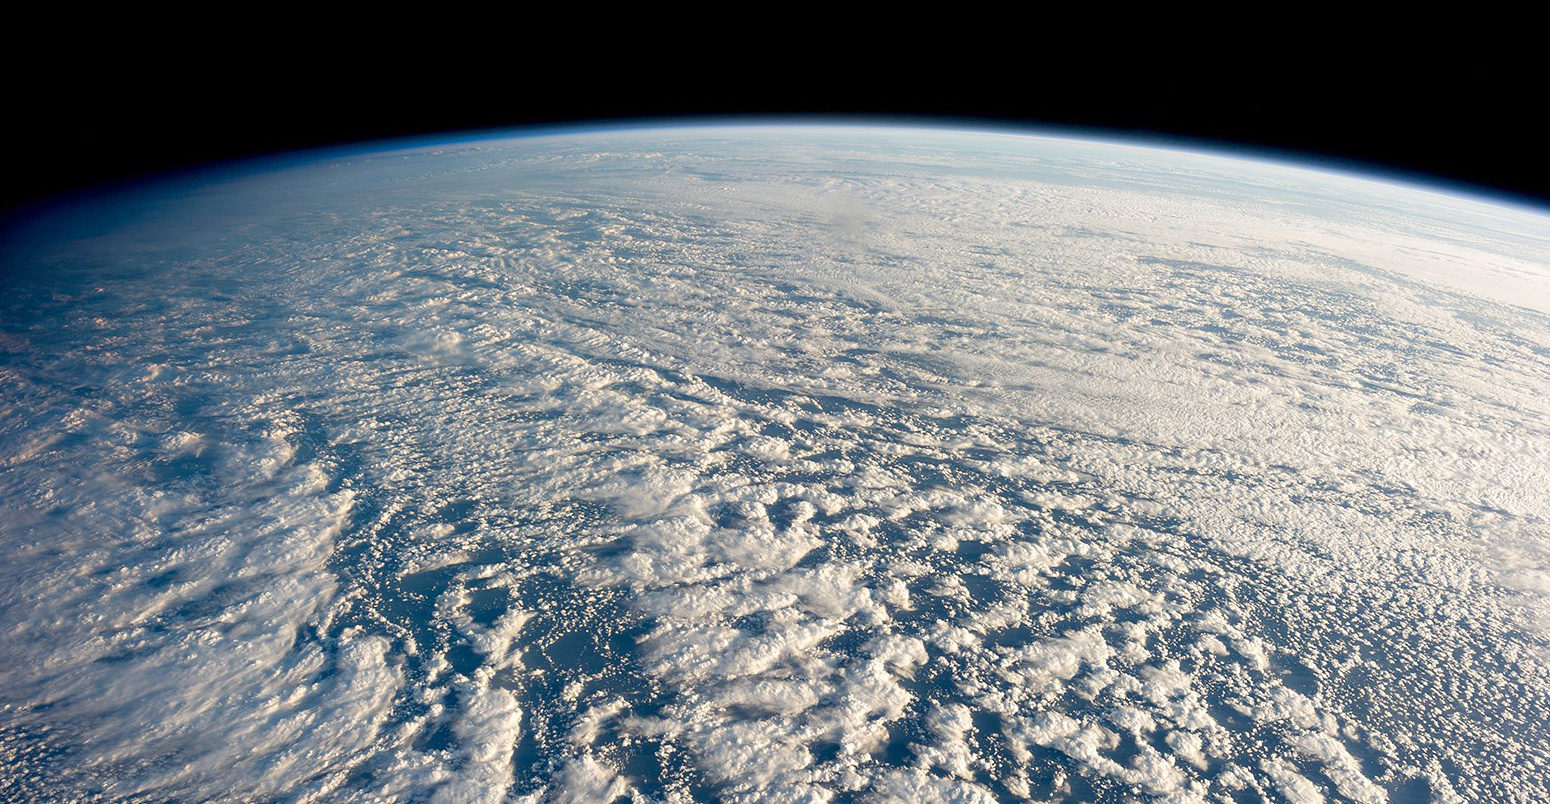 Stratocumulus clouds above the northwestern Pacific Ocean. Credit: ISS Expedition 34 Crew / NASA / Wikimedia Commons.